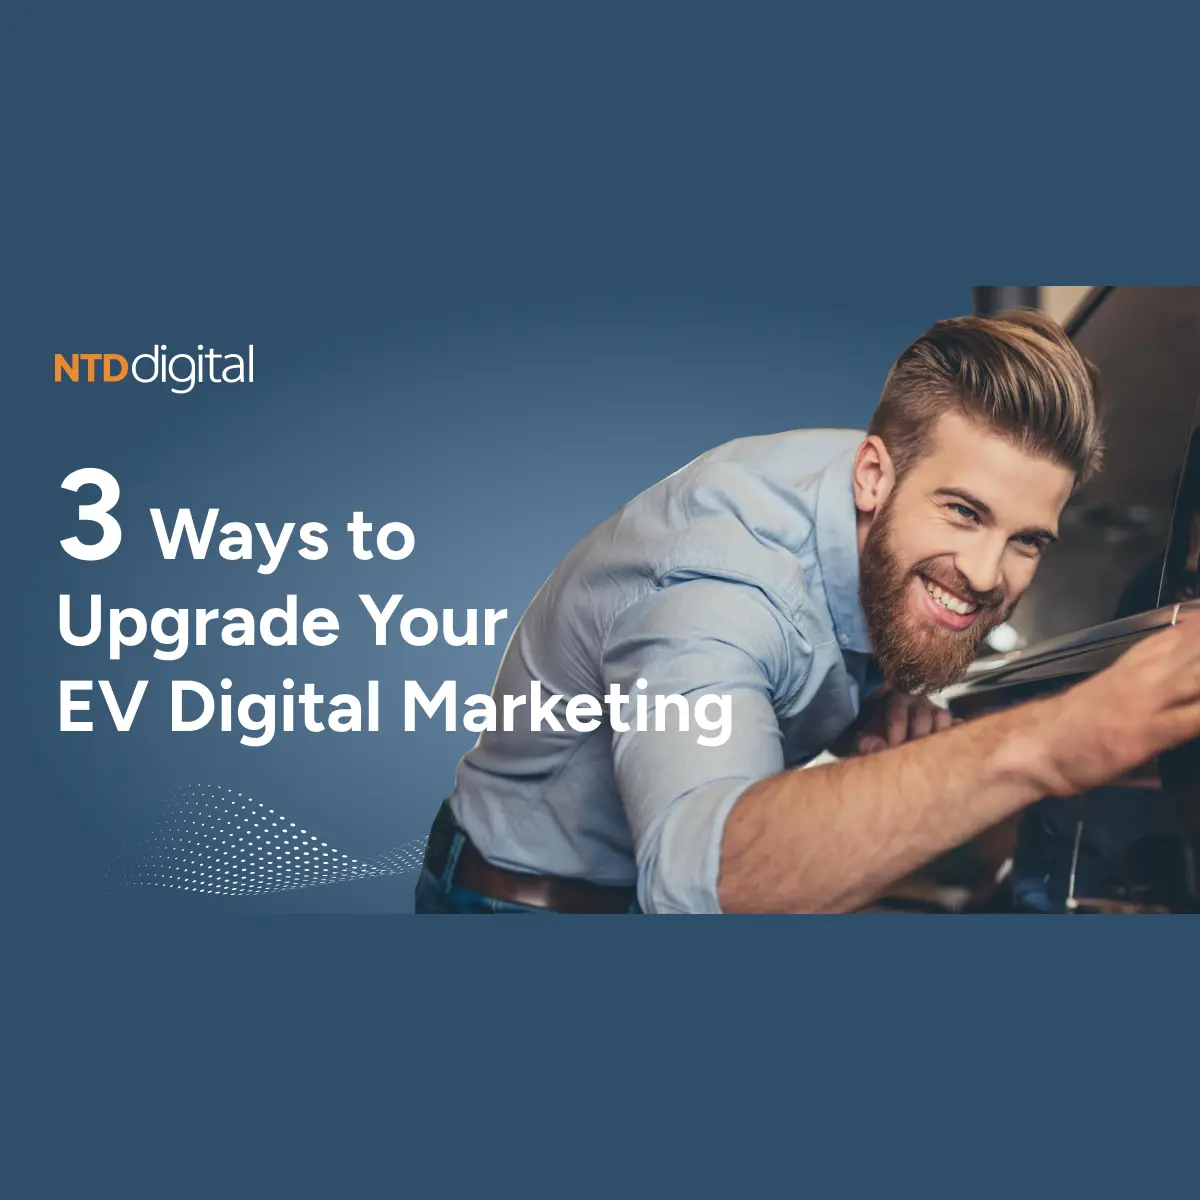 Generating More Leads with Effective Digital Marketing for Electronic Vehicles